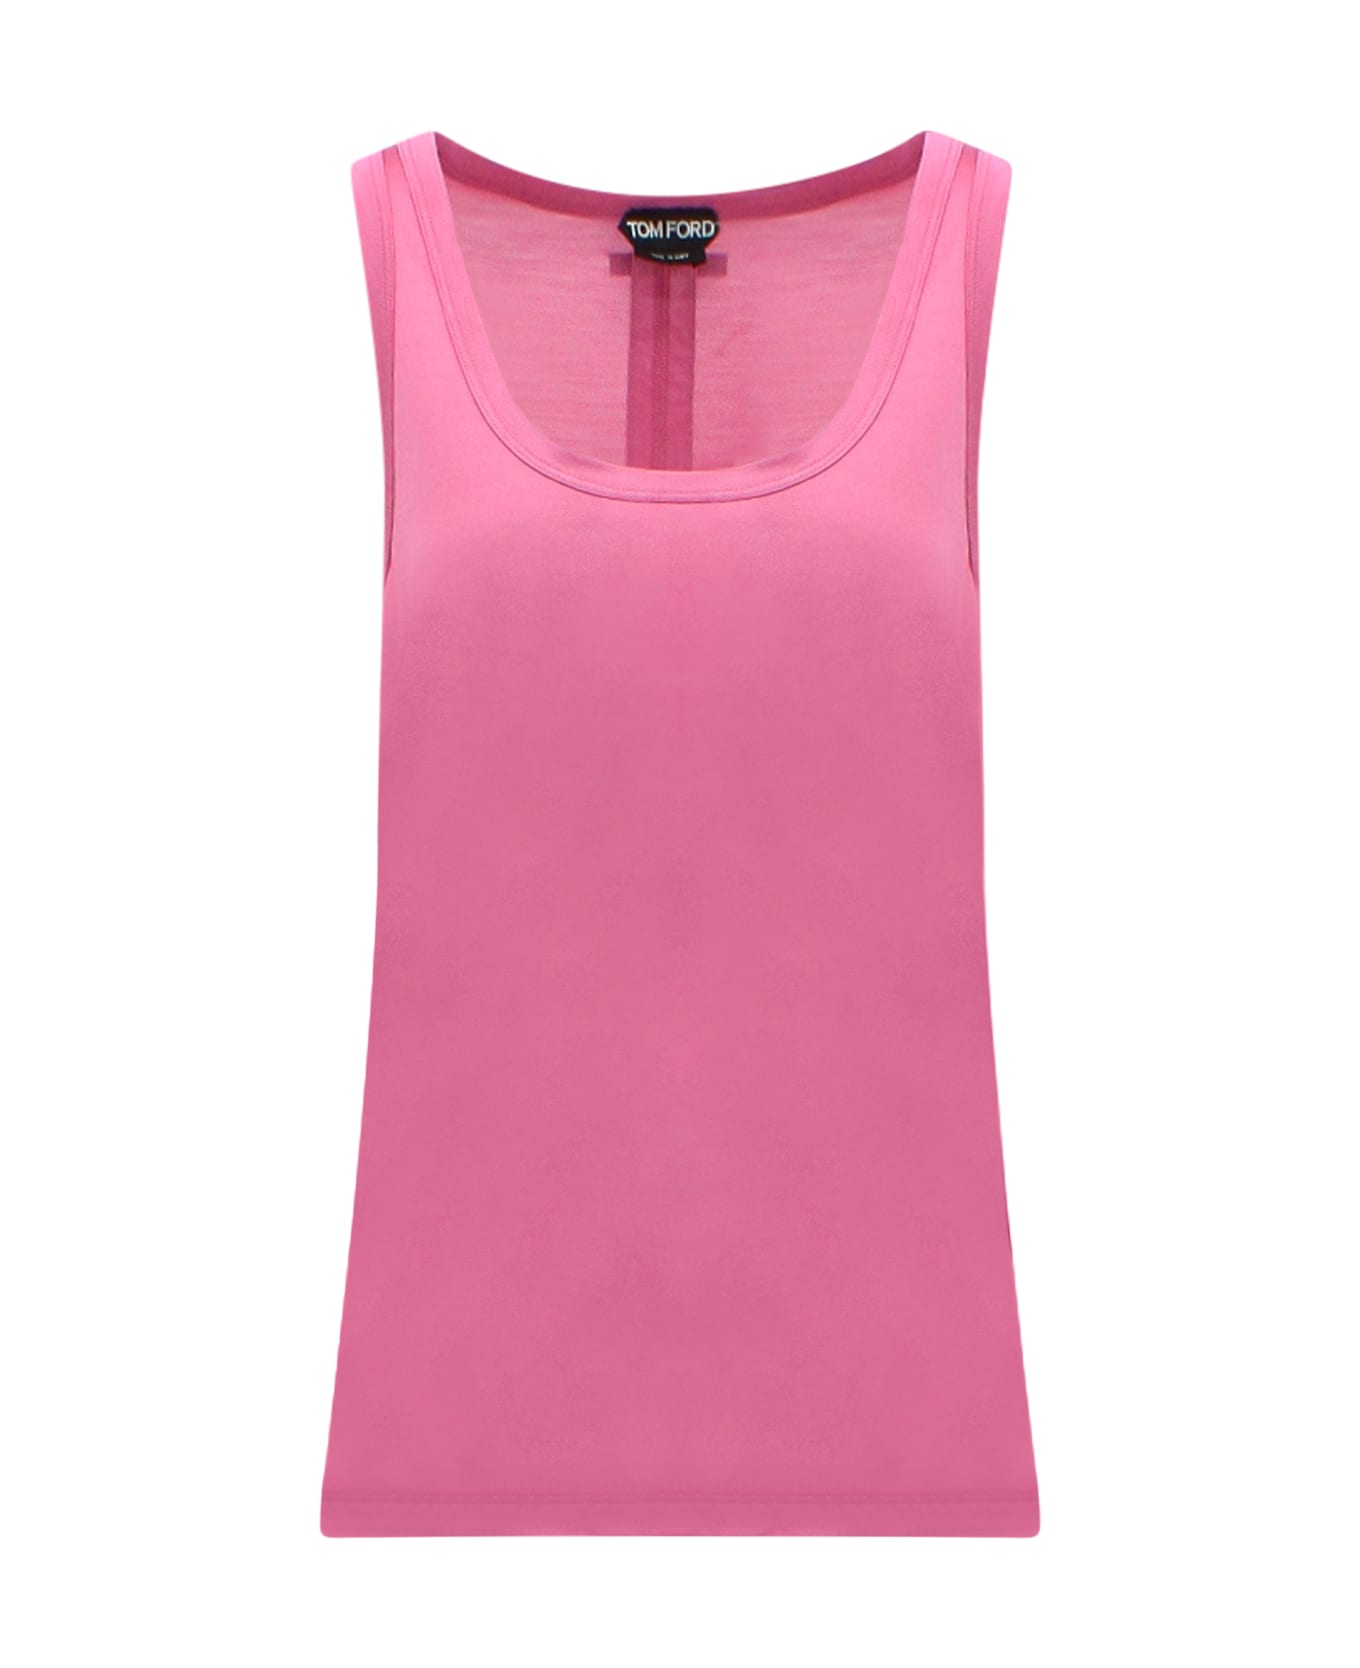 Tom Ford Tank Top - Pink